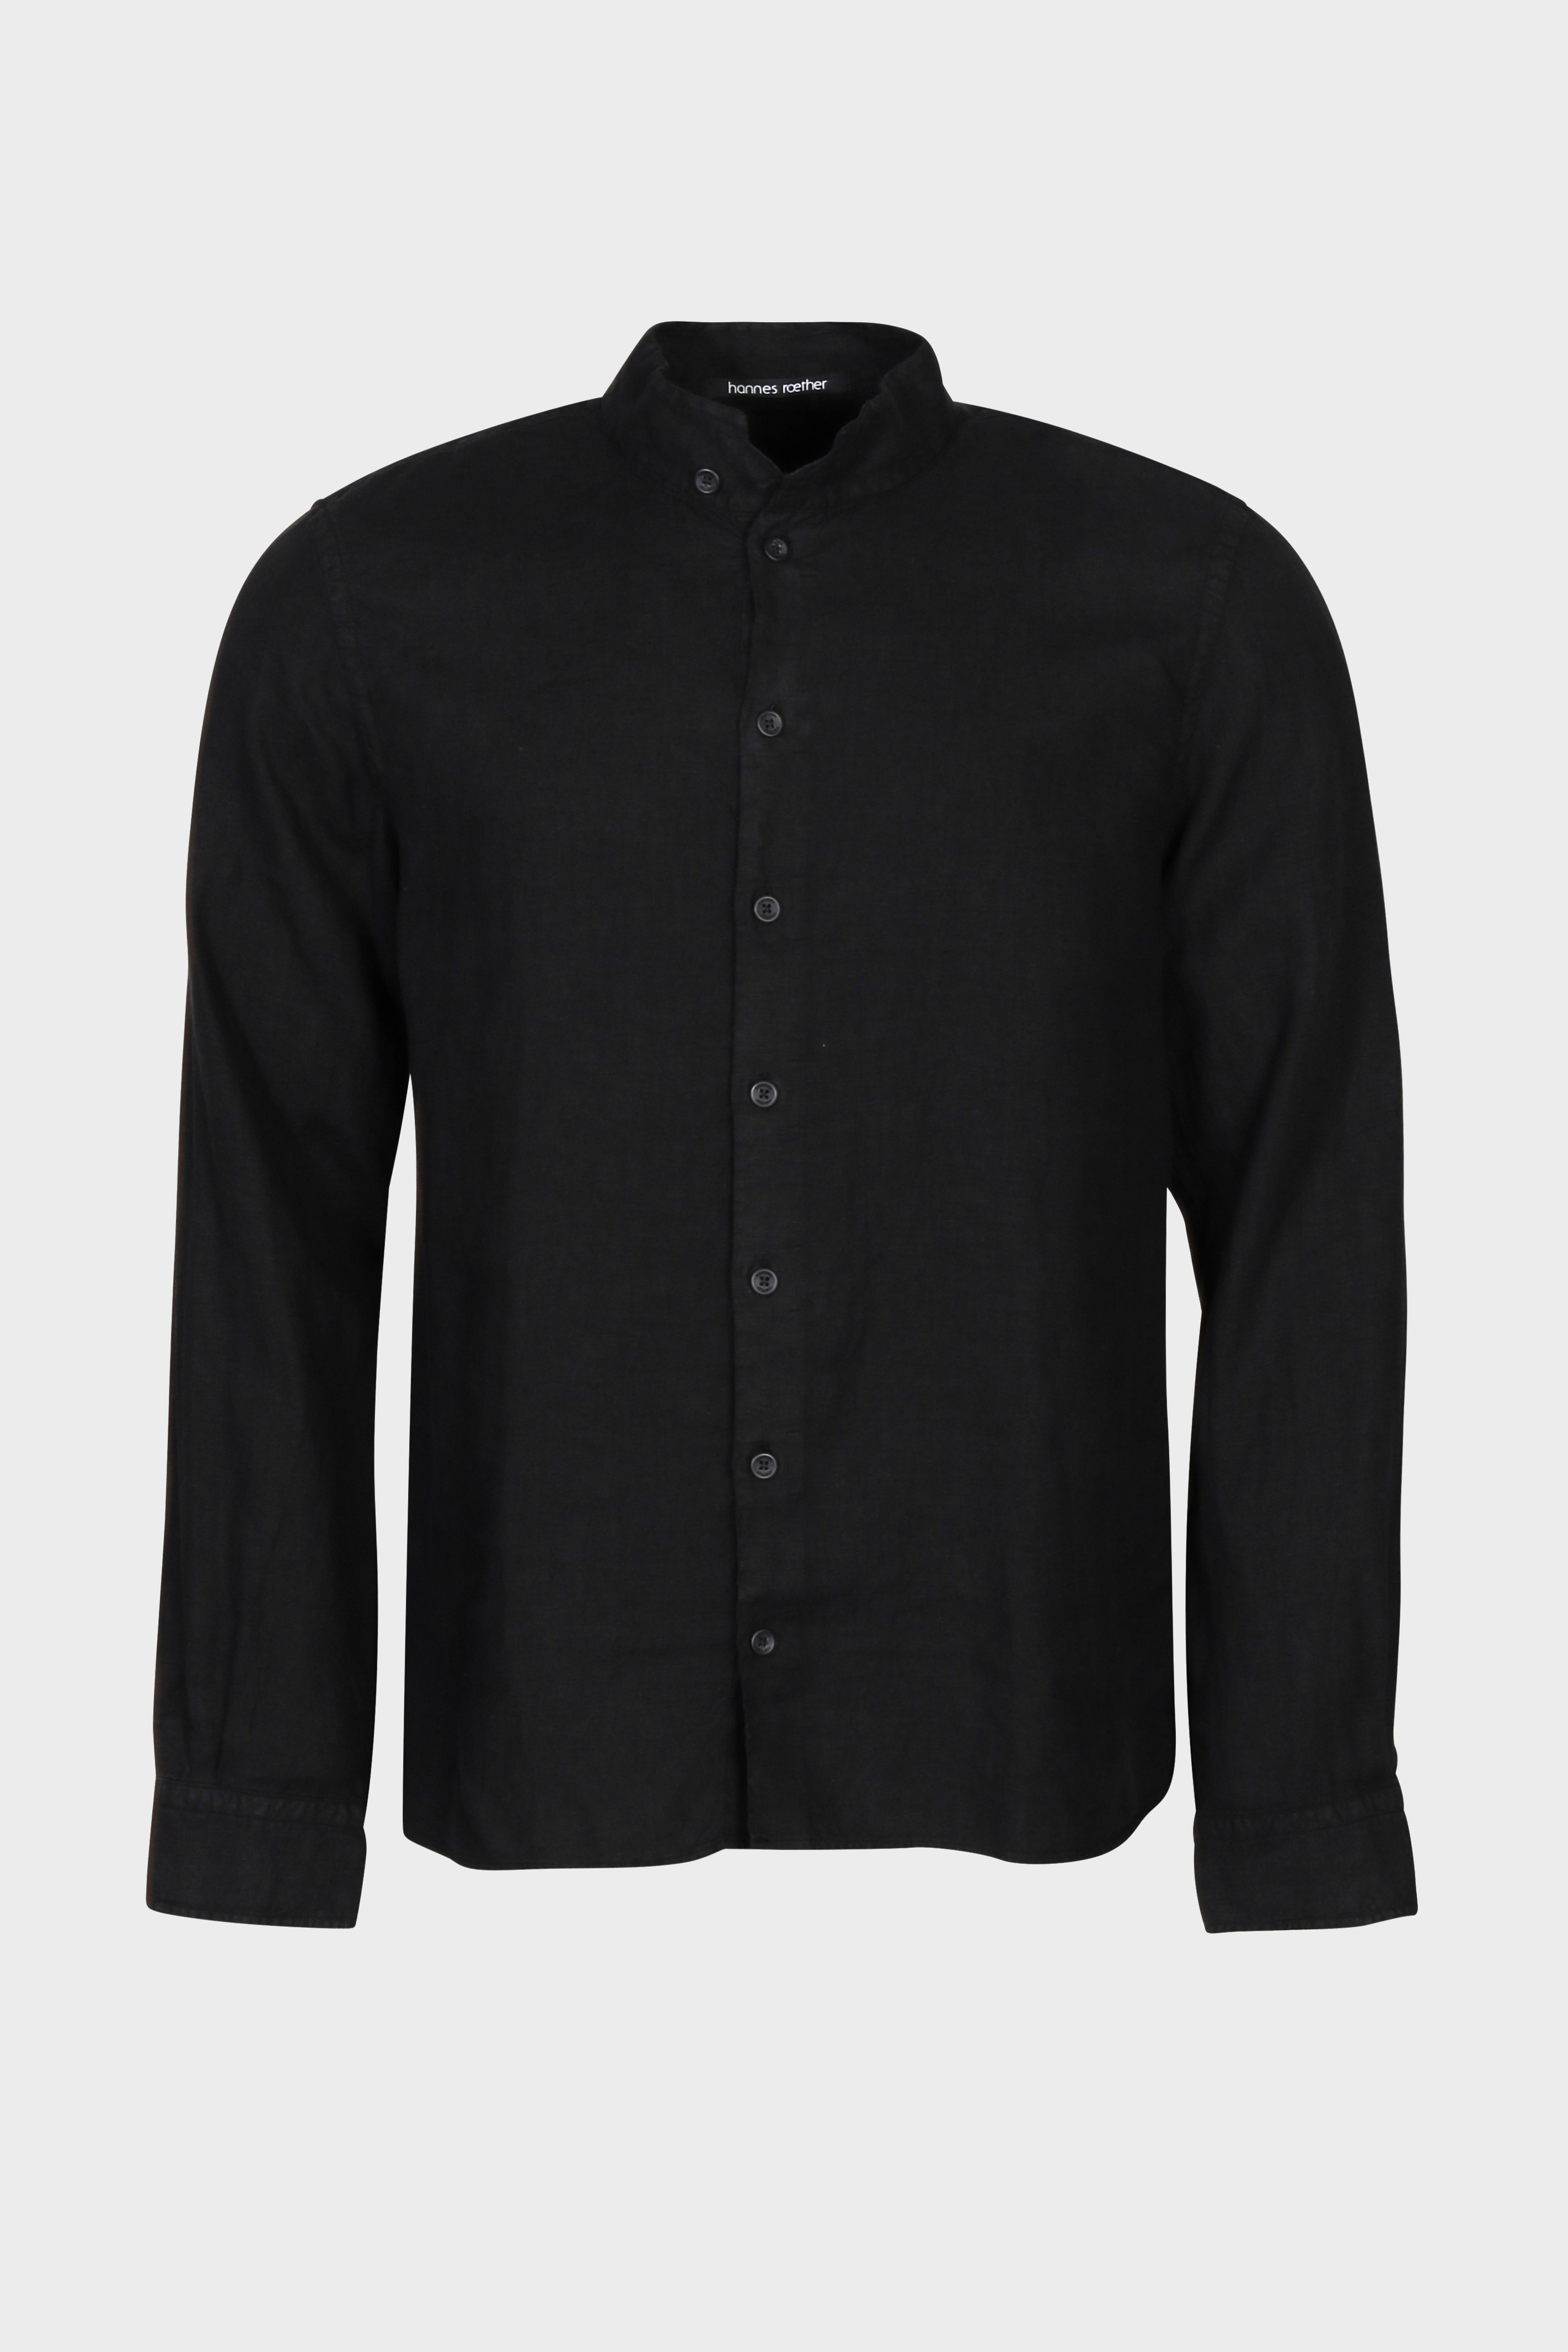 HANNES ROETHER Linen Shirt in Black M